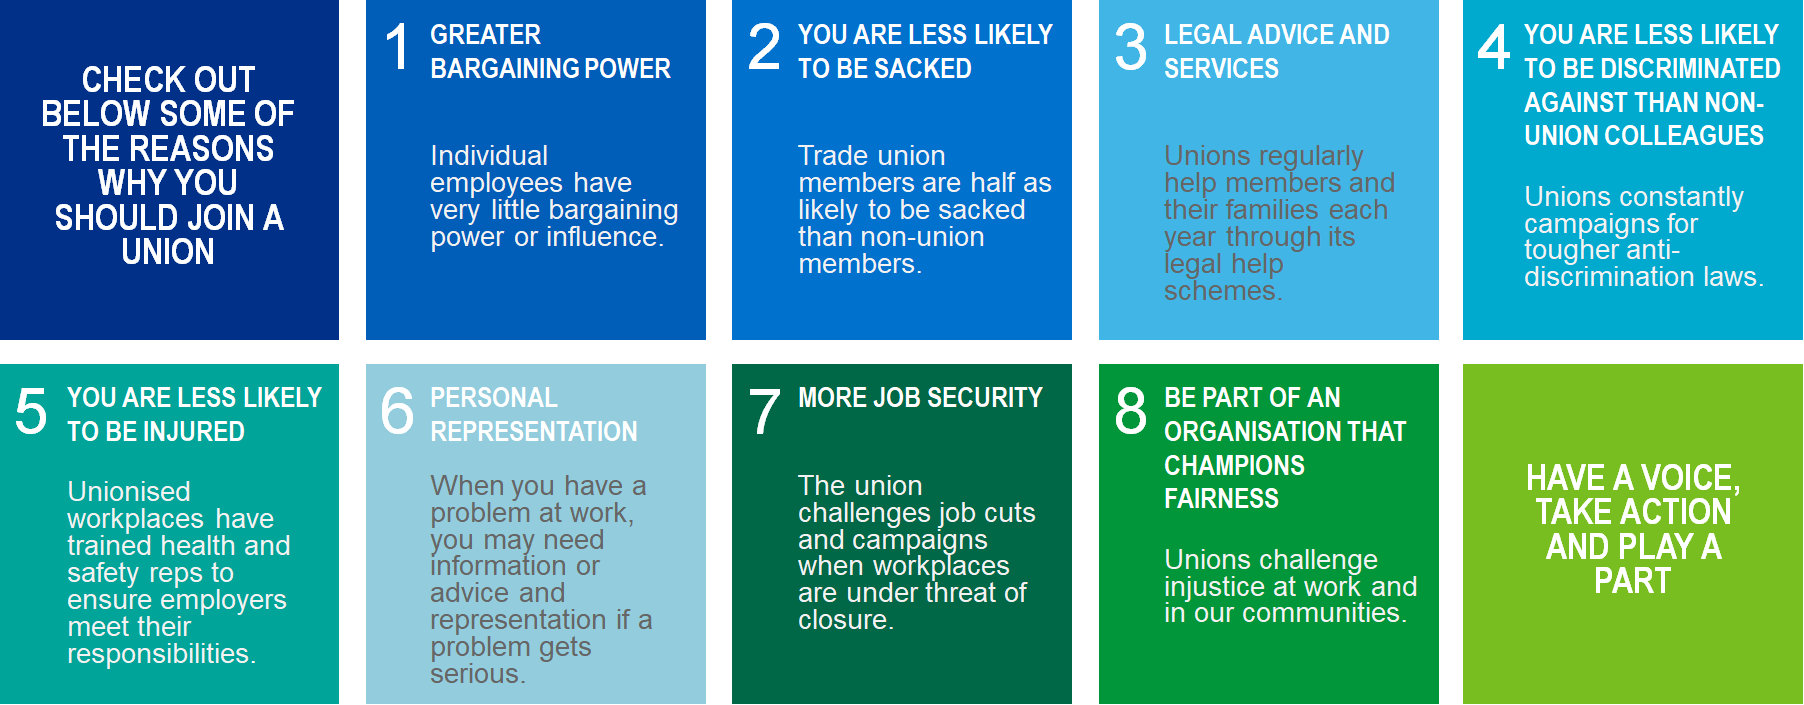 Reasons to join a Union listed